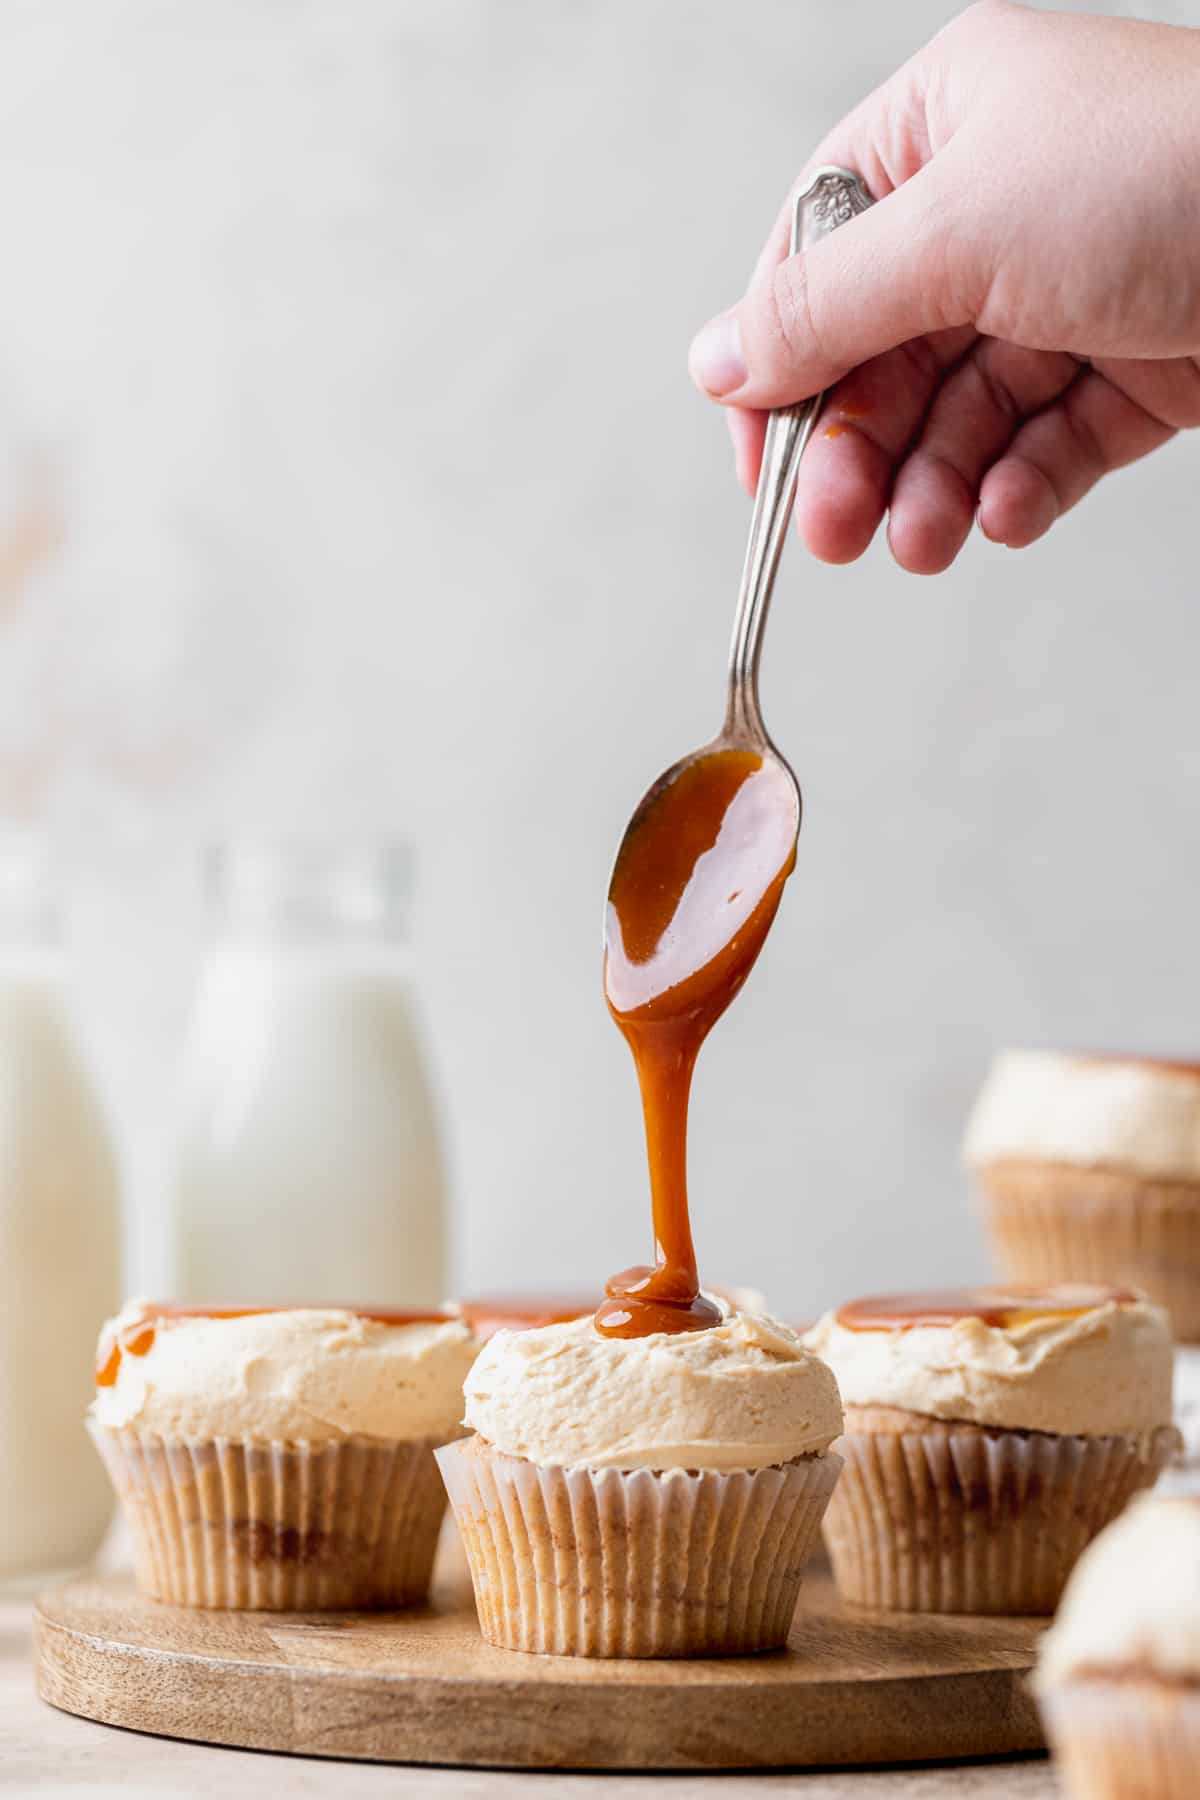 Pouring caramel on top of cupcakes.